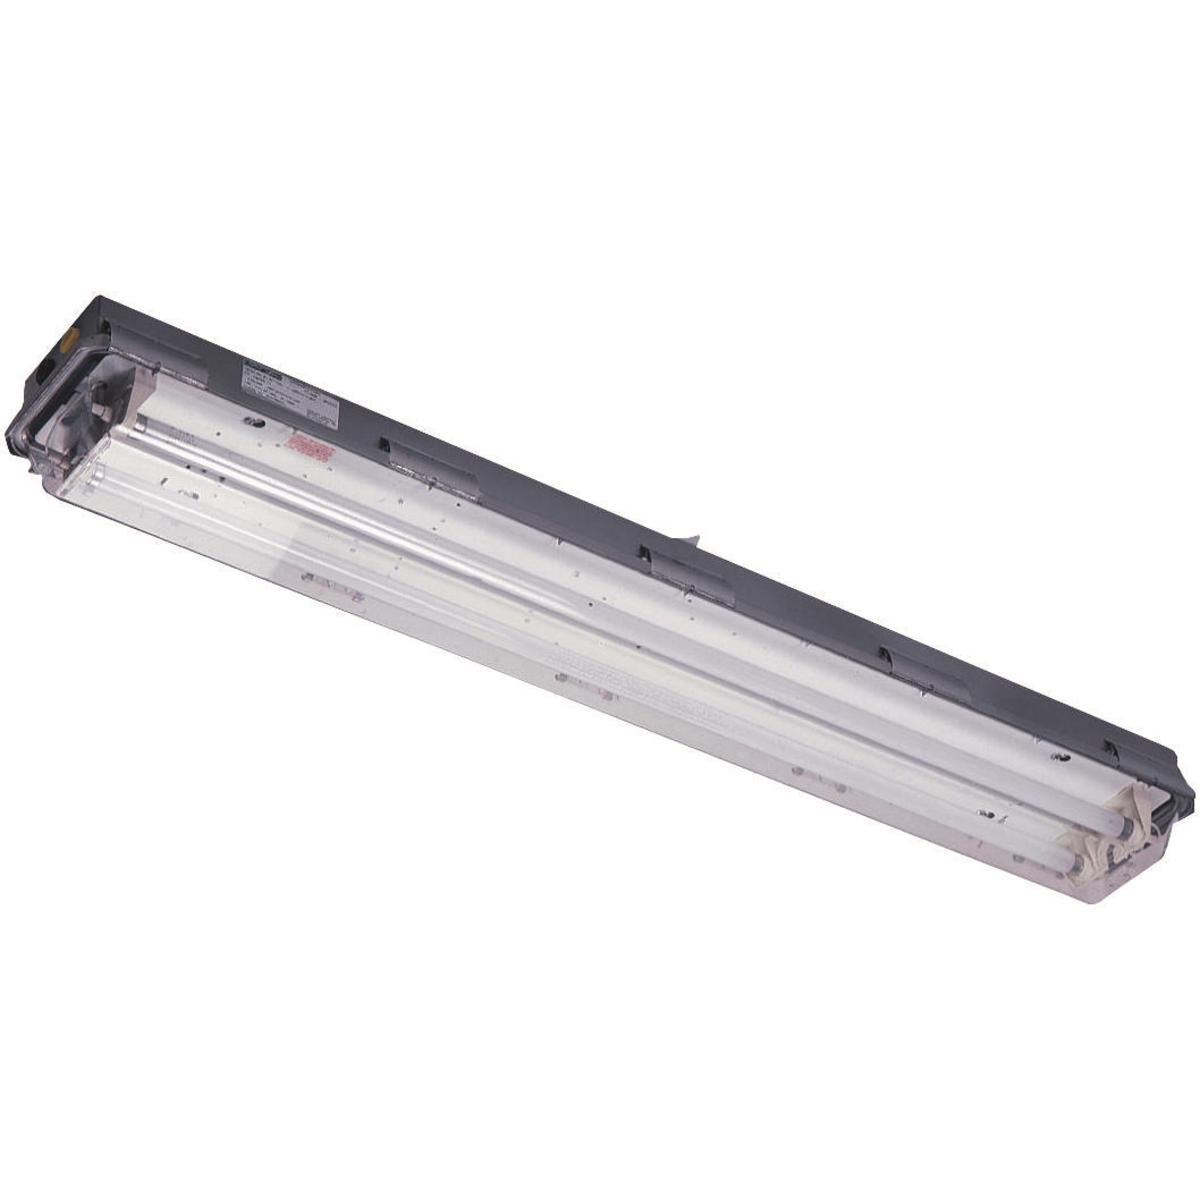 Hubbell LZ2S40201 LZ2S Series- Stainless Steel - 40W 120V - 4' 2-Lamp T-12 Electronic Medium Bi-Pin Start 50°F 40W/60°F 34W  ; NEMA 4X & IP66 rated stainless enclosure with Lexan® impact resistant polycarbonate lens. ; Two 3/4” NPT stainless hubs - one at each end (include